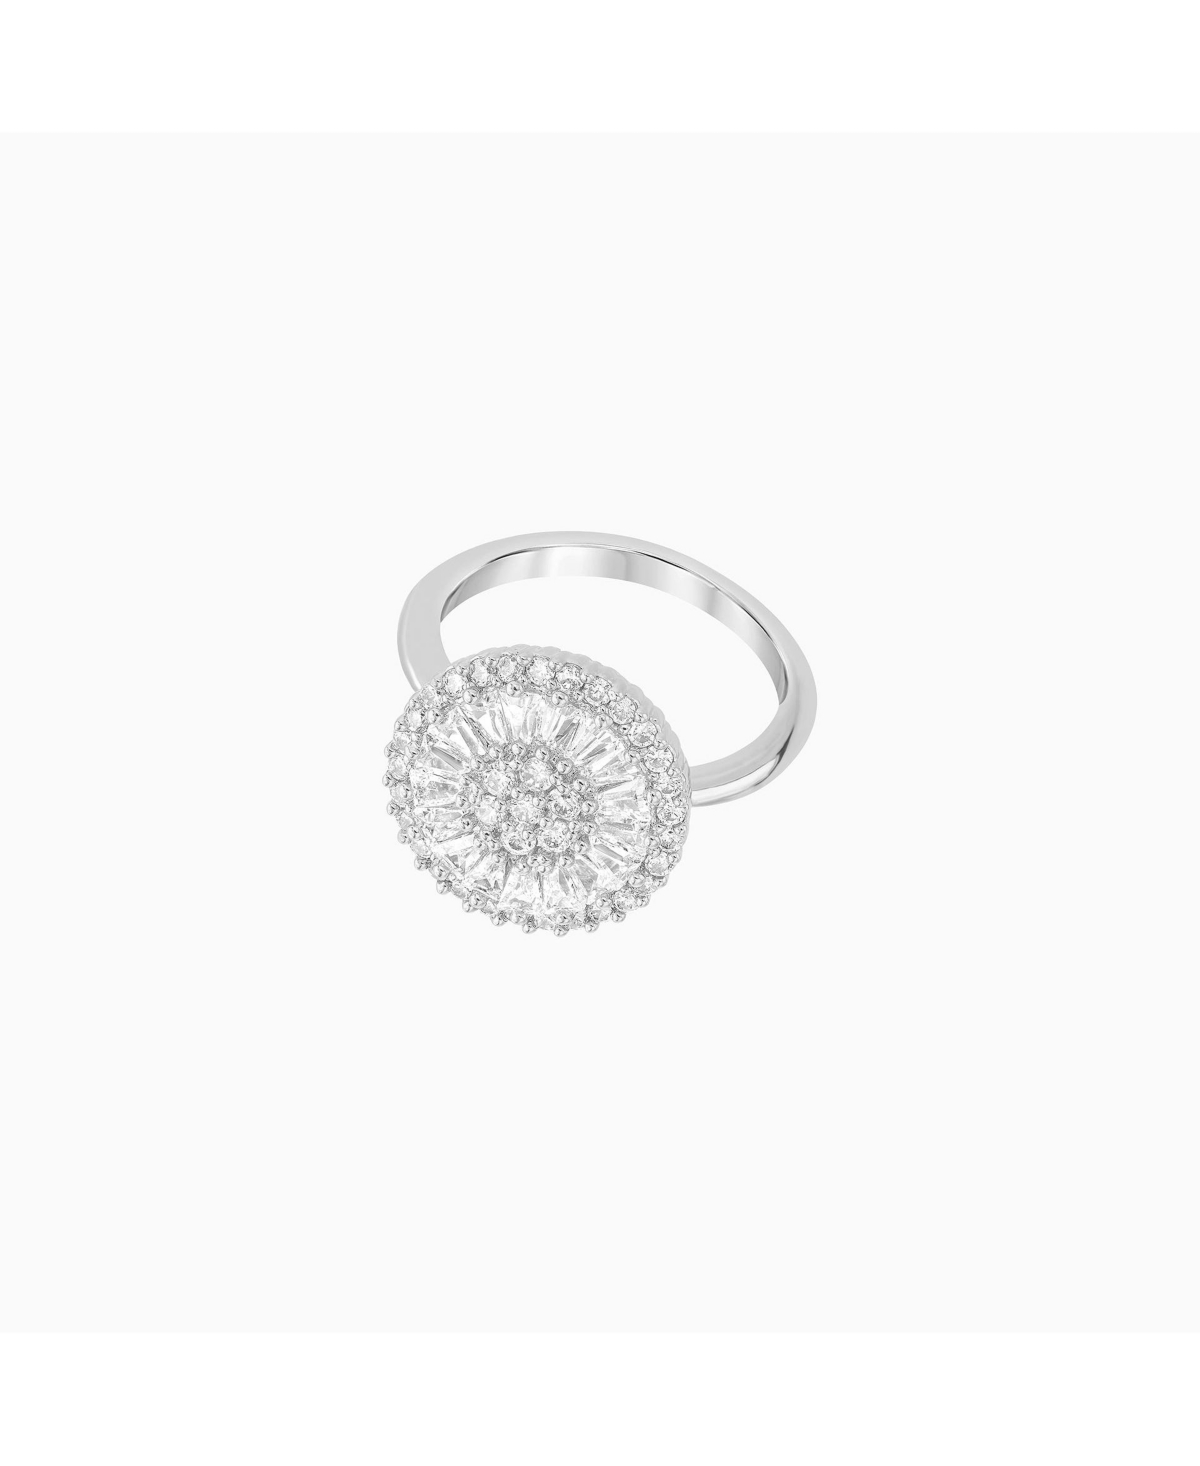 Elise Statement Cocktail Ring - Silver